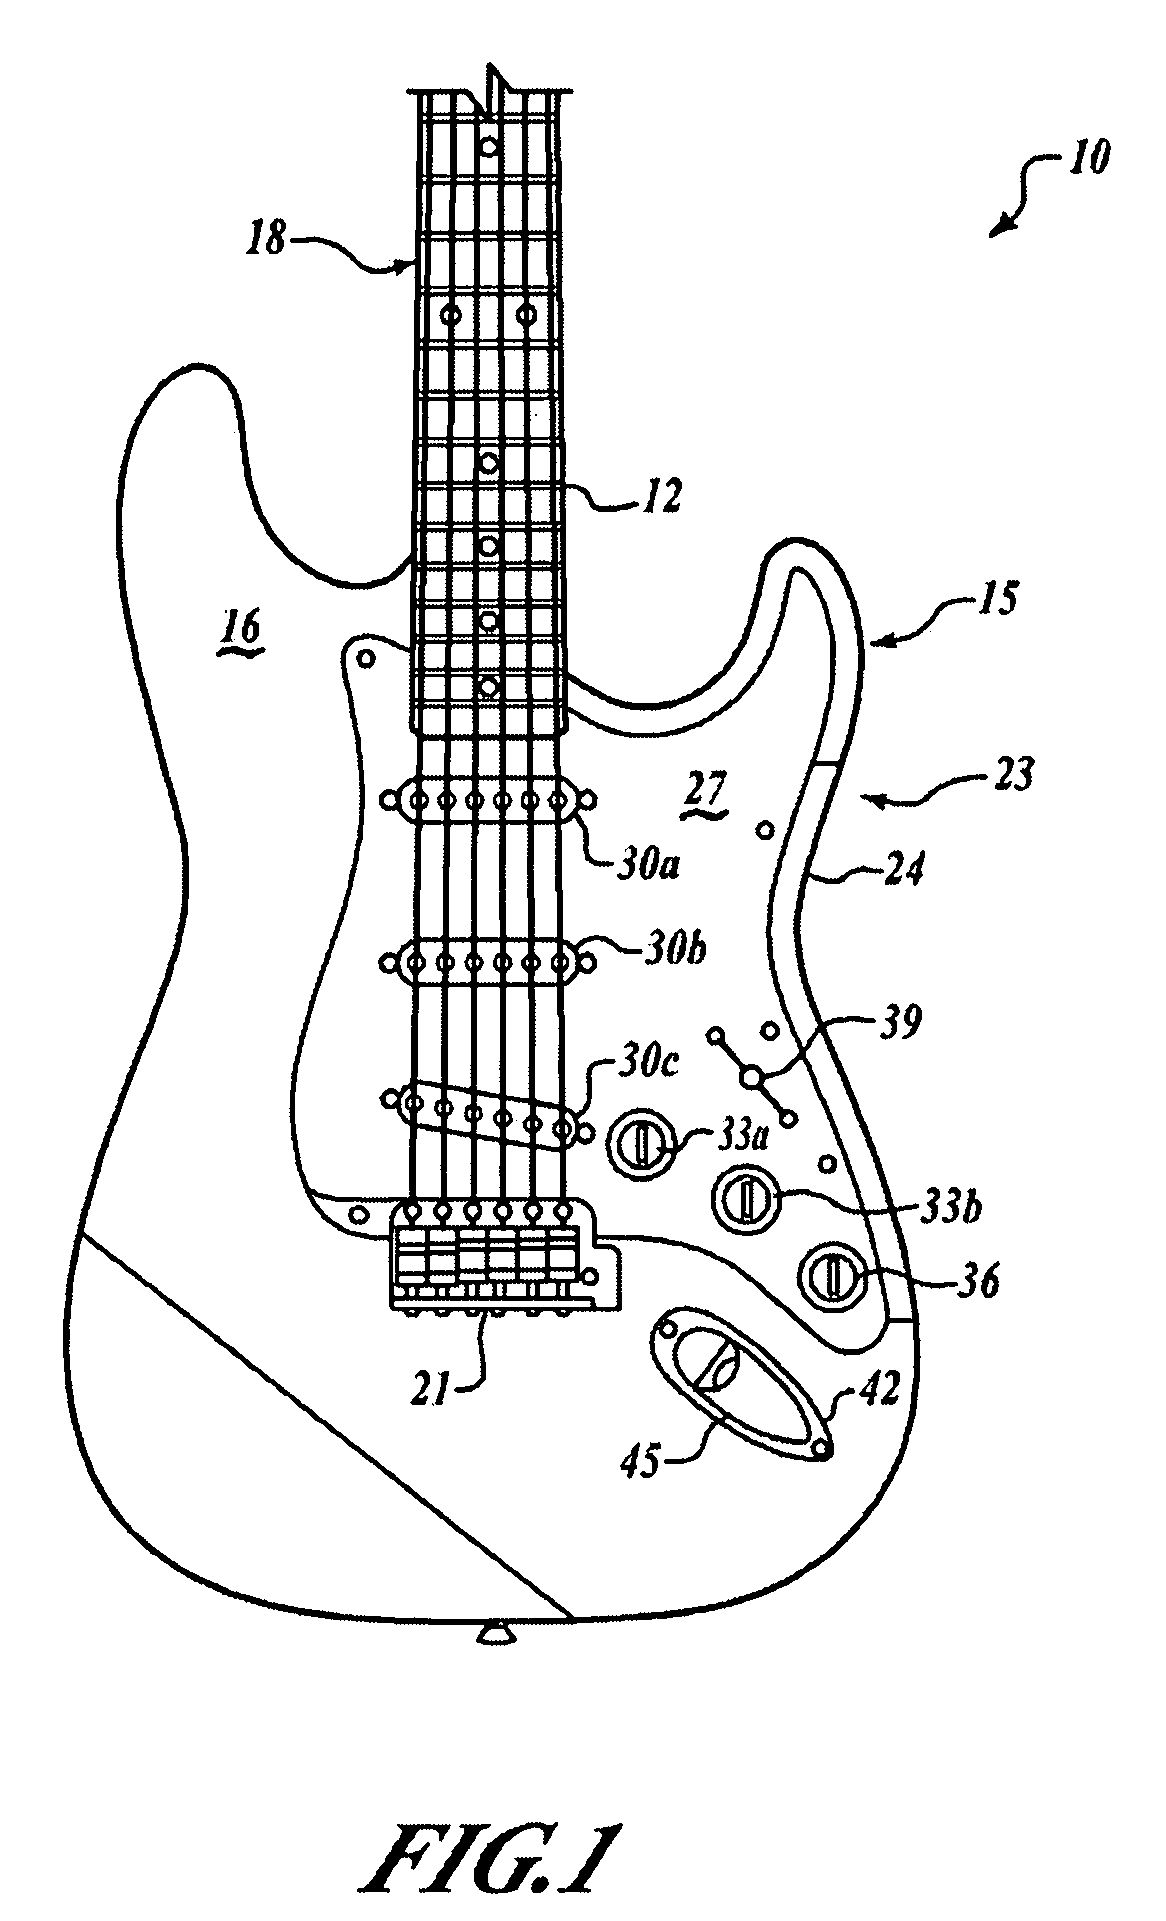 Docking system for pickups on electric guitars